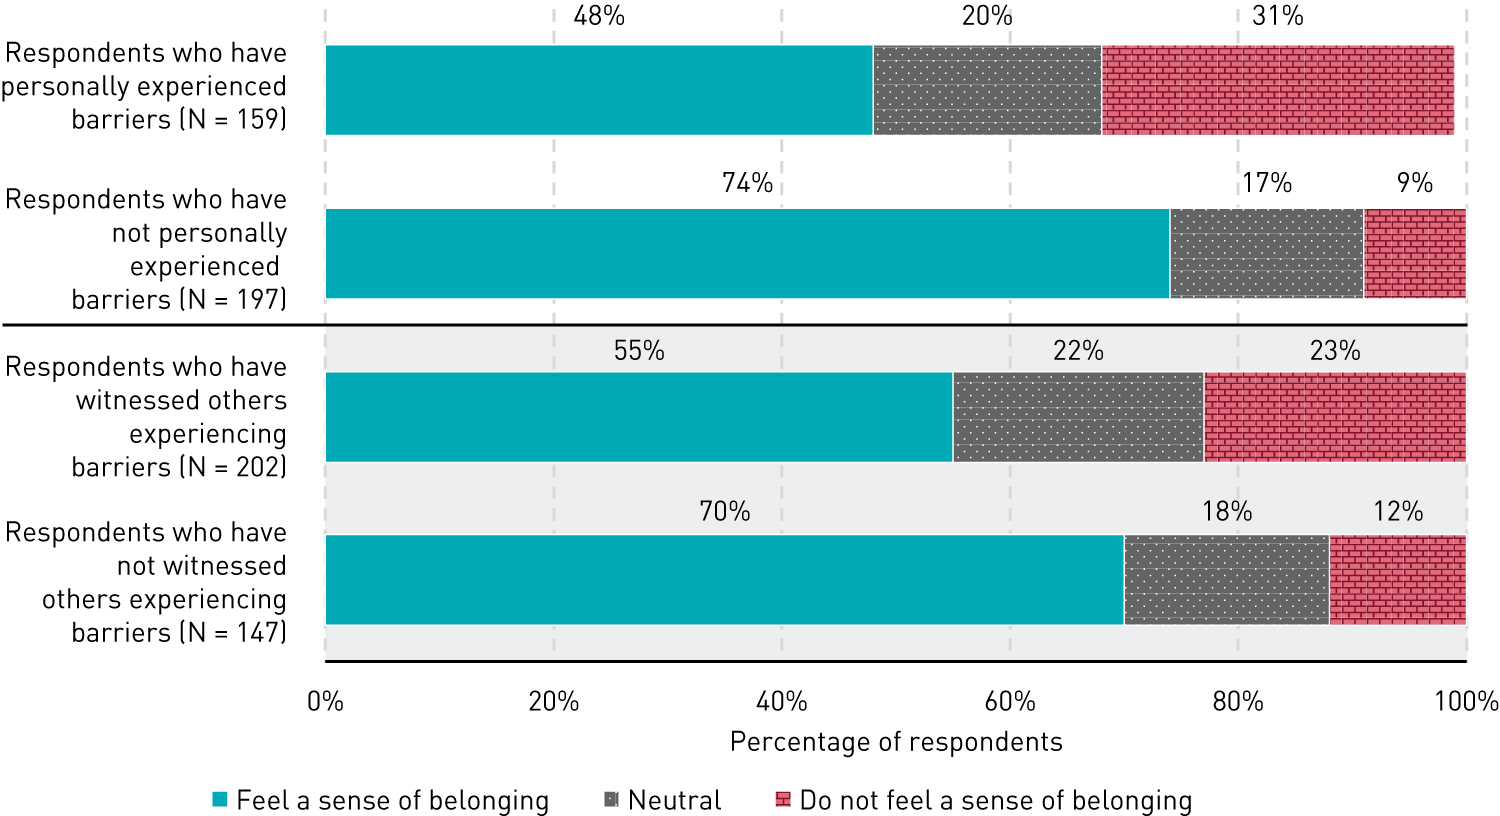 Stacked bar chart showing sense of belonging by experiences with identity-based job barriers. Among those who have personally experienced barriers, 48% feel a sense of belonging, 31% do not, and 20% are neutral. Among those who have not personally experienced barriers, 74% feel a sense of belonging, 9% do not, and 17% are neutral. Among those who have witnessed others experiencing barriers, 55% feel a sense of belonging, 23% do not, and 22% are neutral. Among those who have not witnessed others experiencing barriers, 70% feel a sense of belonging, 12% do not, and 18% are neutral.